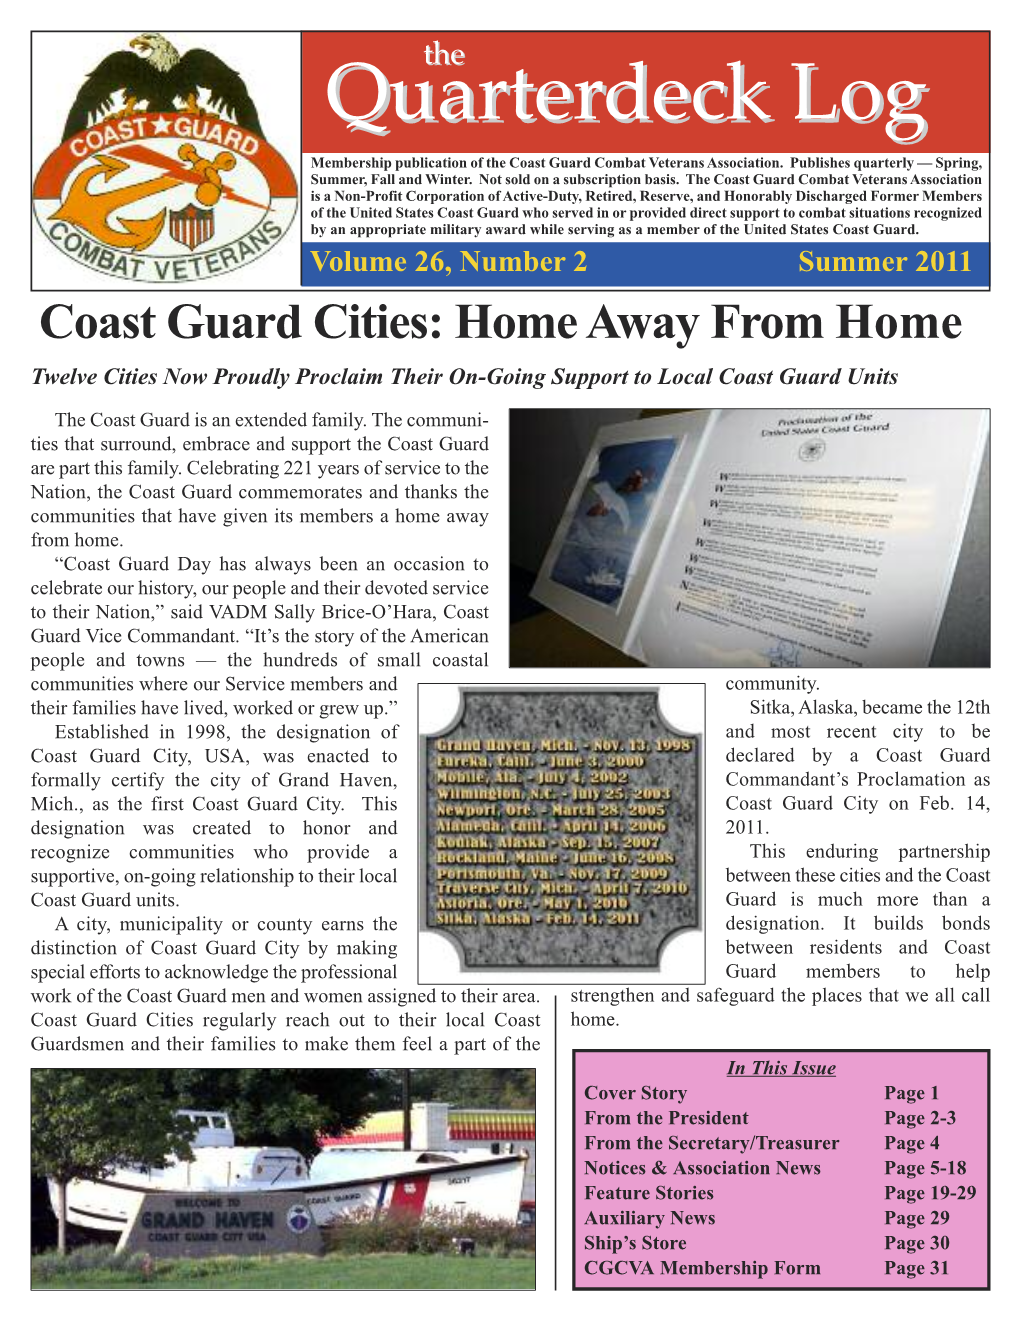 Collecting Coast Guard — the End of Woody’S Story by Frank Bari, QD Log Assistant Editor